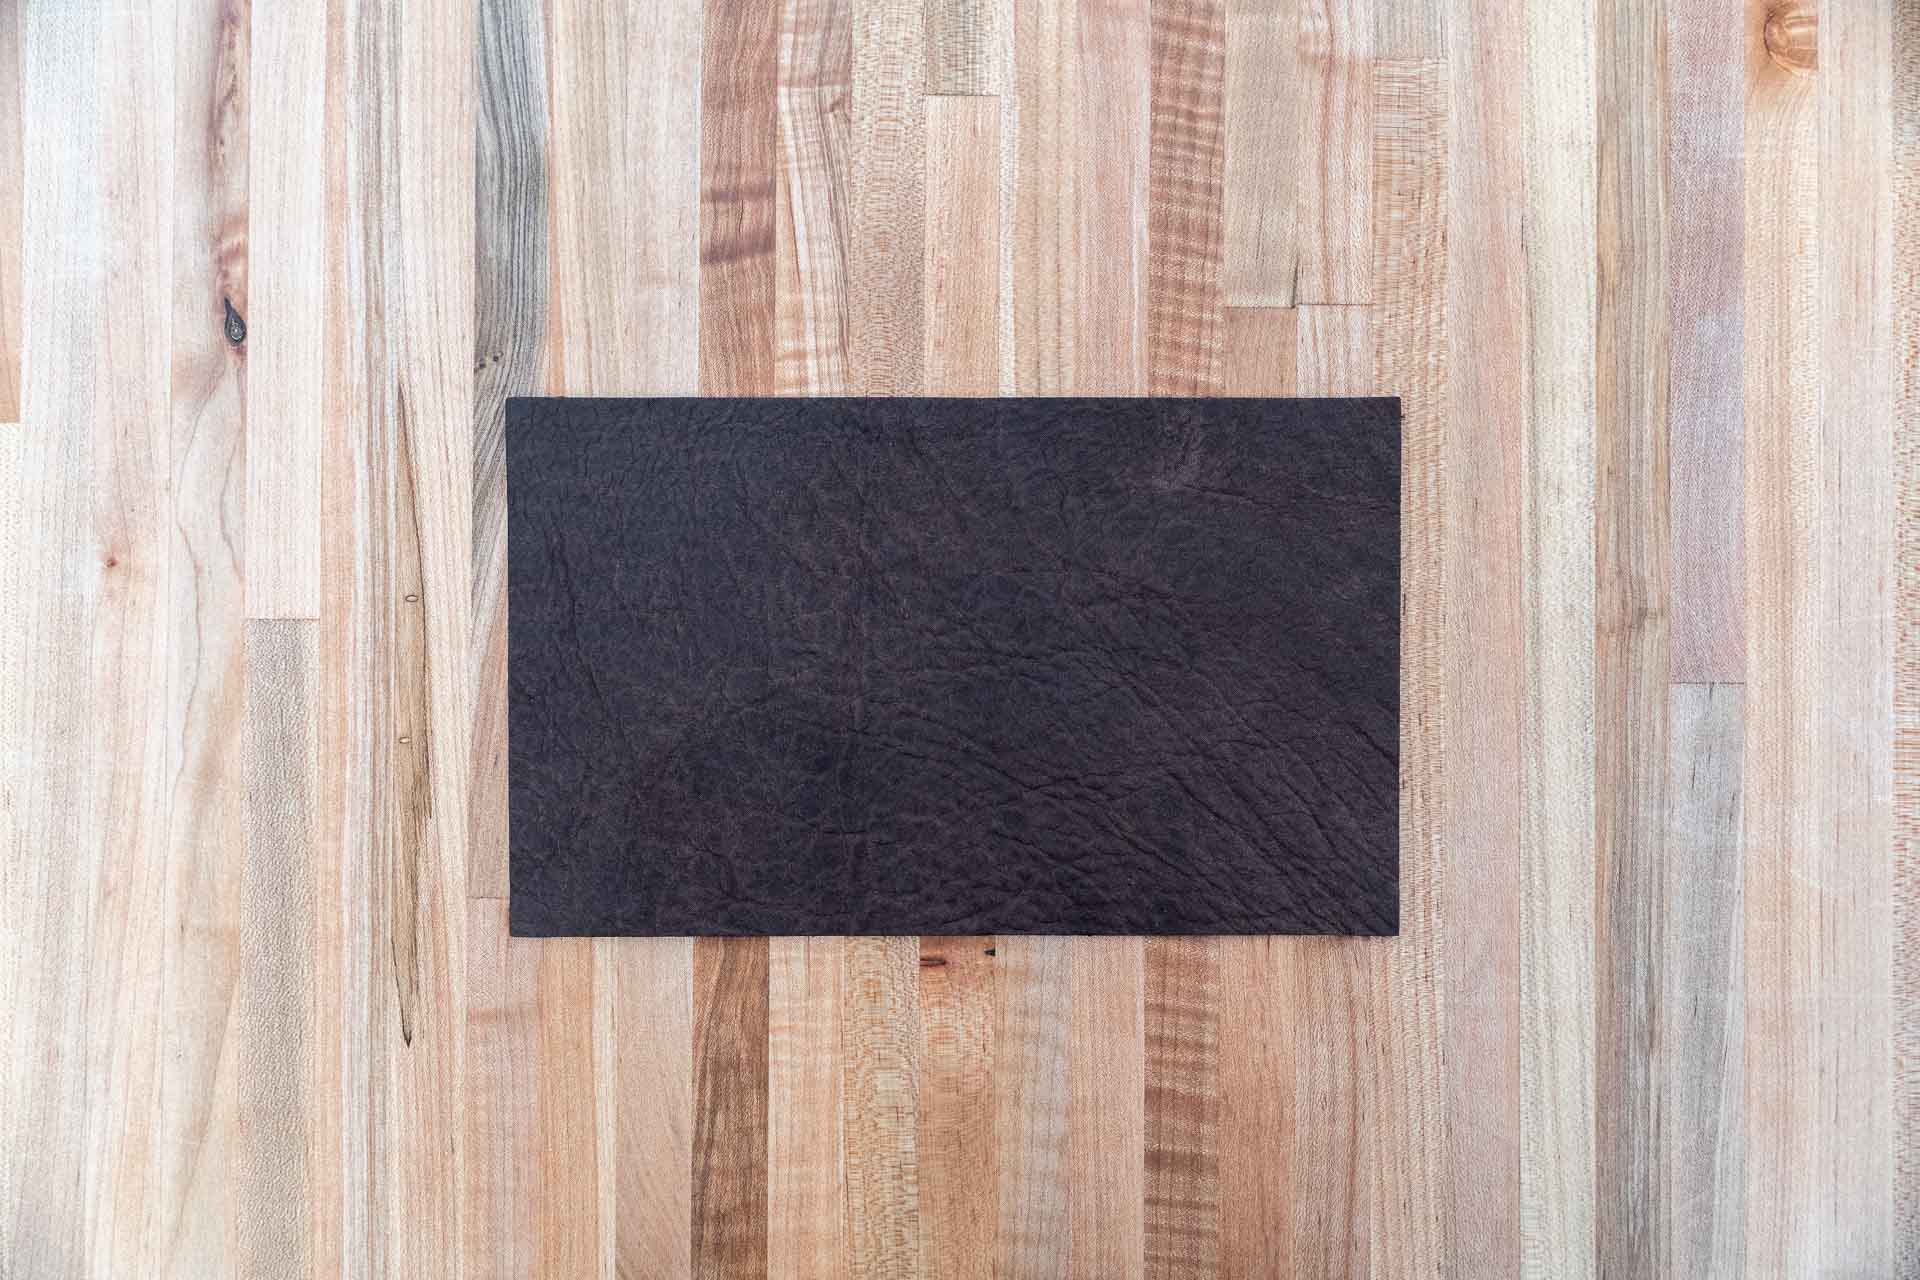 Rectangular Leather Coaster - 9.5 x 5.75 inches - Made in USA